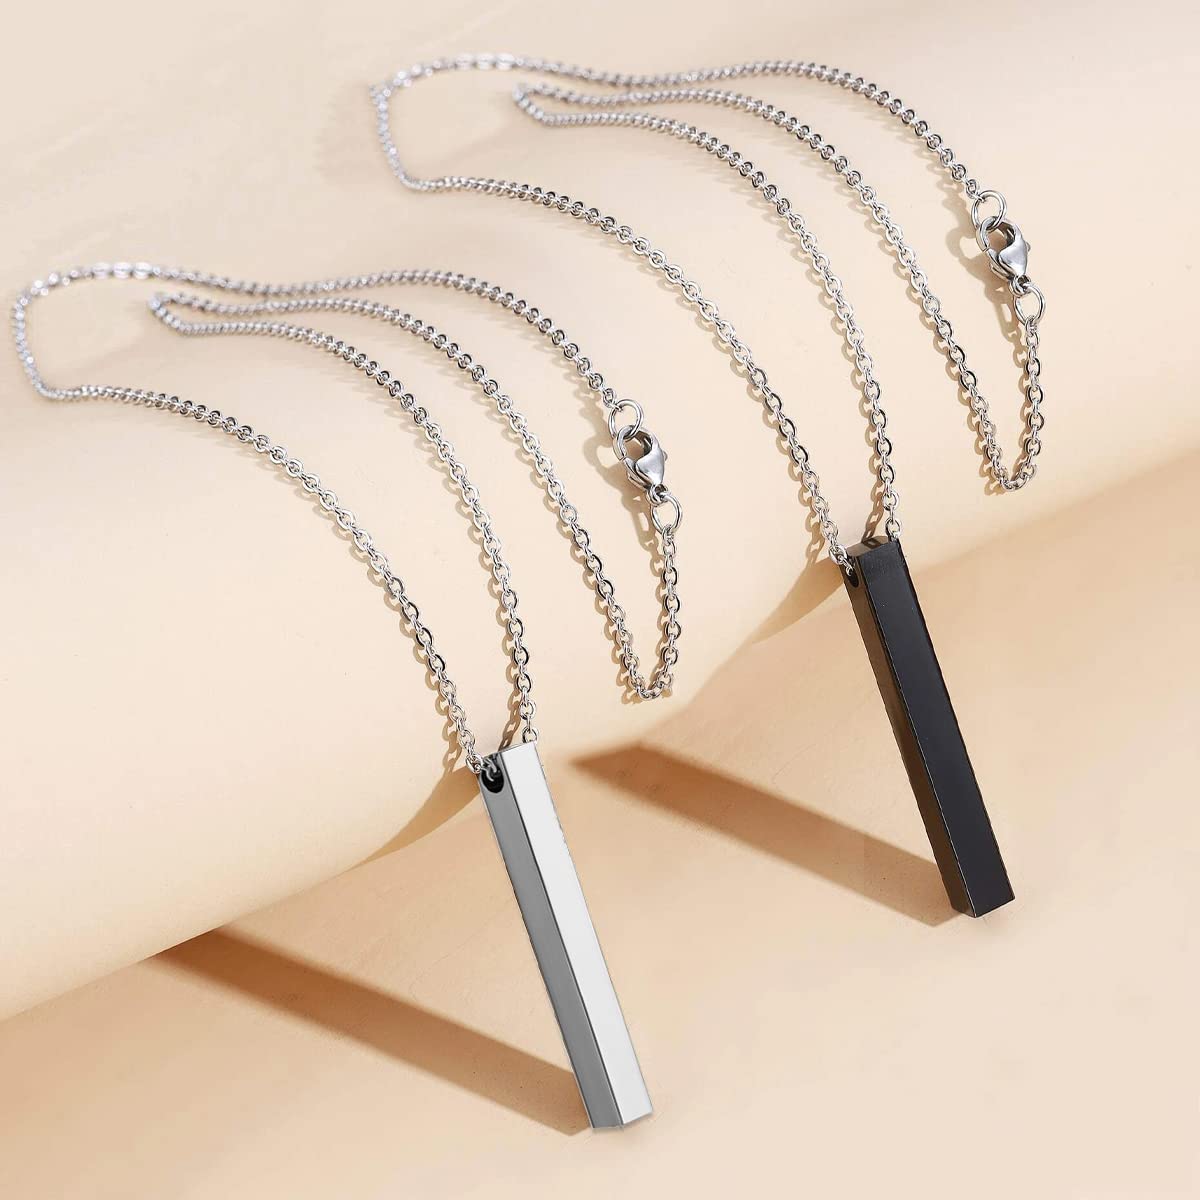 Kwisy Creation Pvt Ltd Vertical Bar Black Cuboid Stick Stainless Steel  Locket Necklace Chain Set Brass Plated Alloy Chain Set Price in India - Buy  Kwisy Creation Pvt Ltd Vertical Bar Black